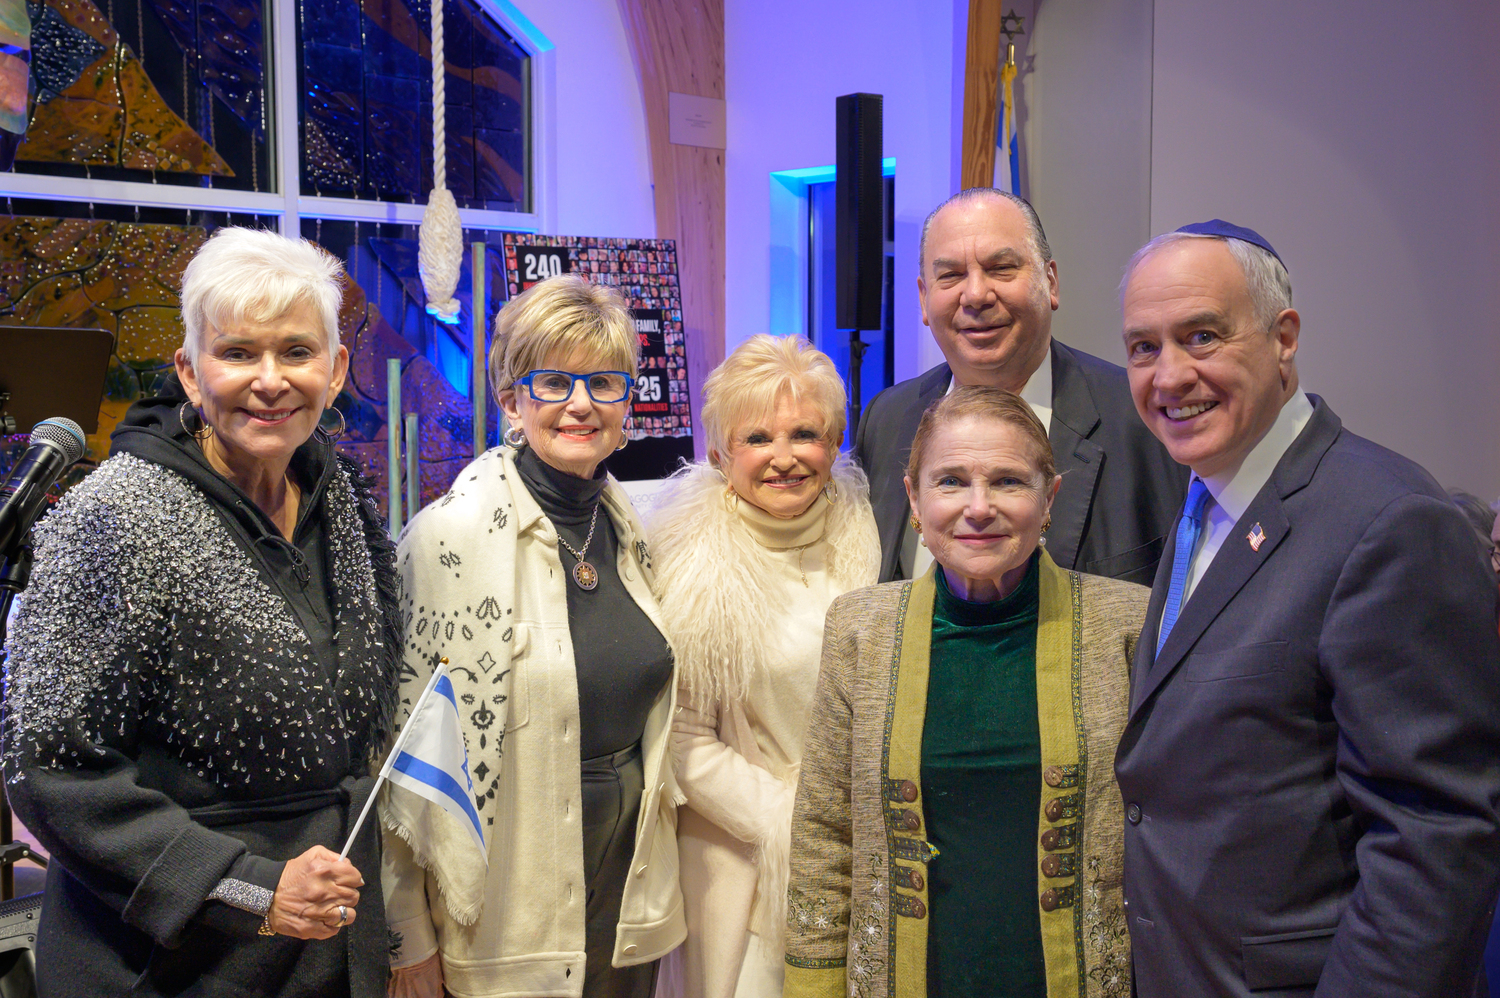 From left, Carol Levin, Sandra Cahn, Victoria Schneps, Tovah Feldshuh, Rabbi Marc Schneier and Comptroller Tom DiNapoli at the Stand With Israel event at the Hampton Synagogue on Saturday night.